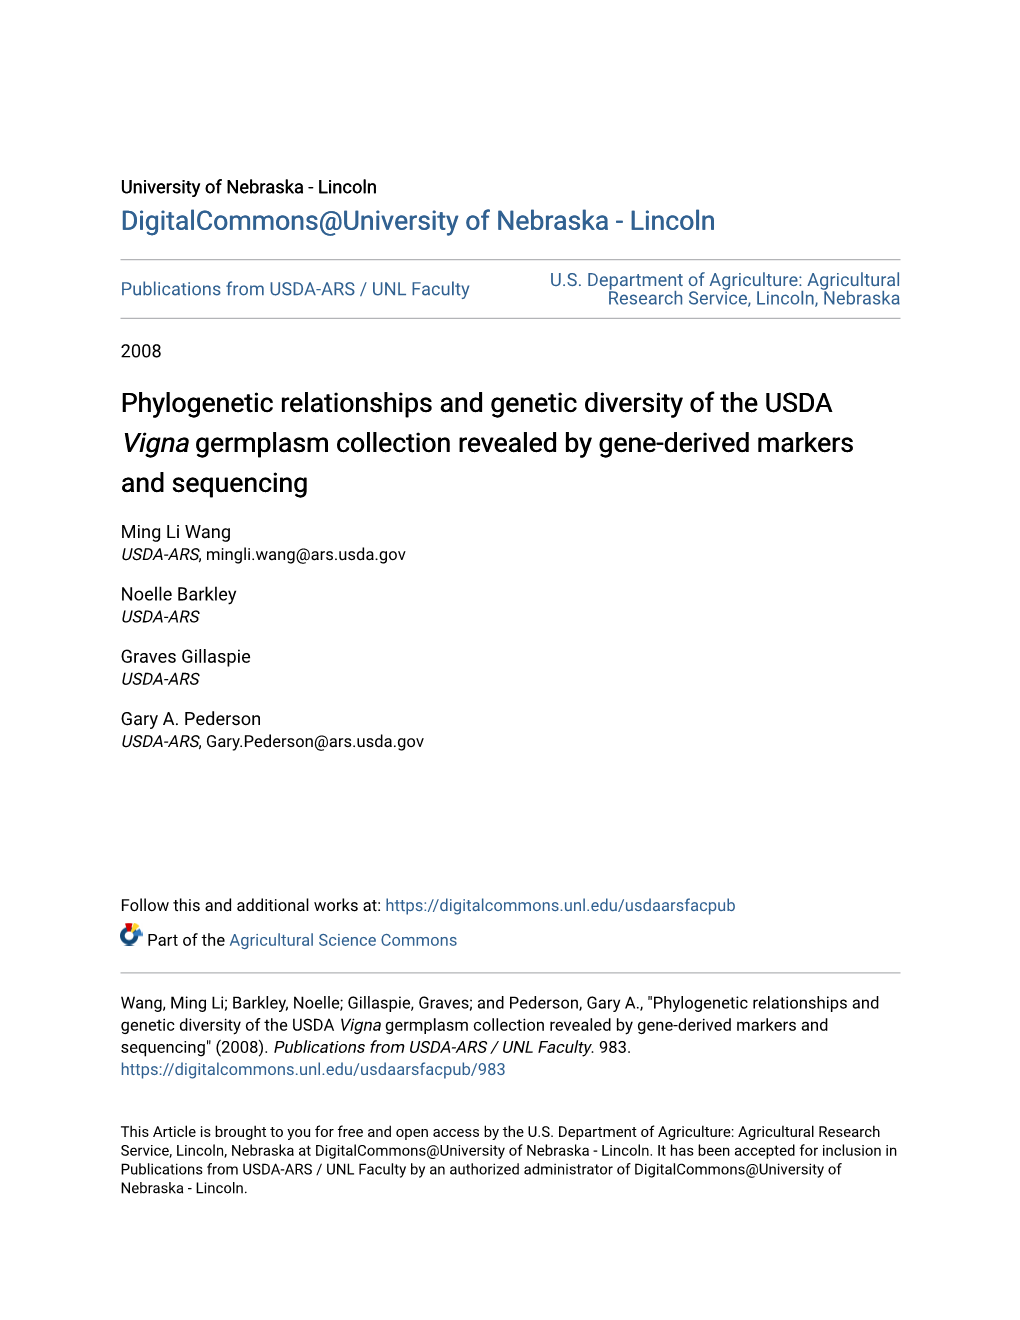 Phylogenetic Relationships and Genetic Diversity of the USDA Vigna Germplasm Collection Revealed by Gene-Derived Markers and Sequencing